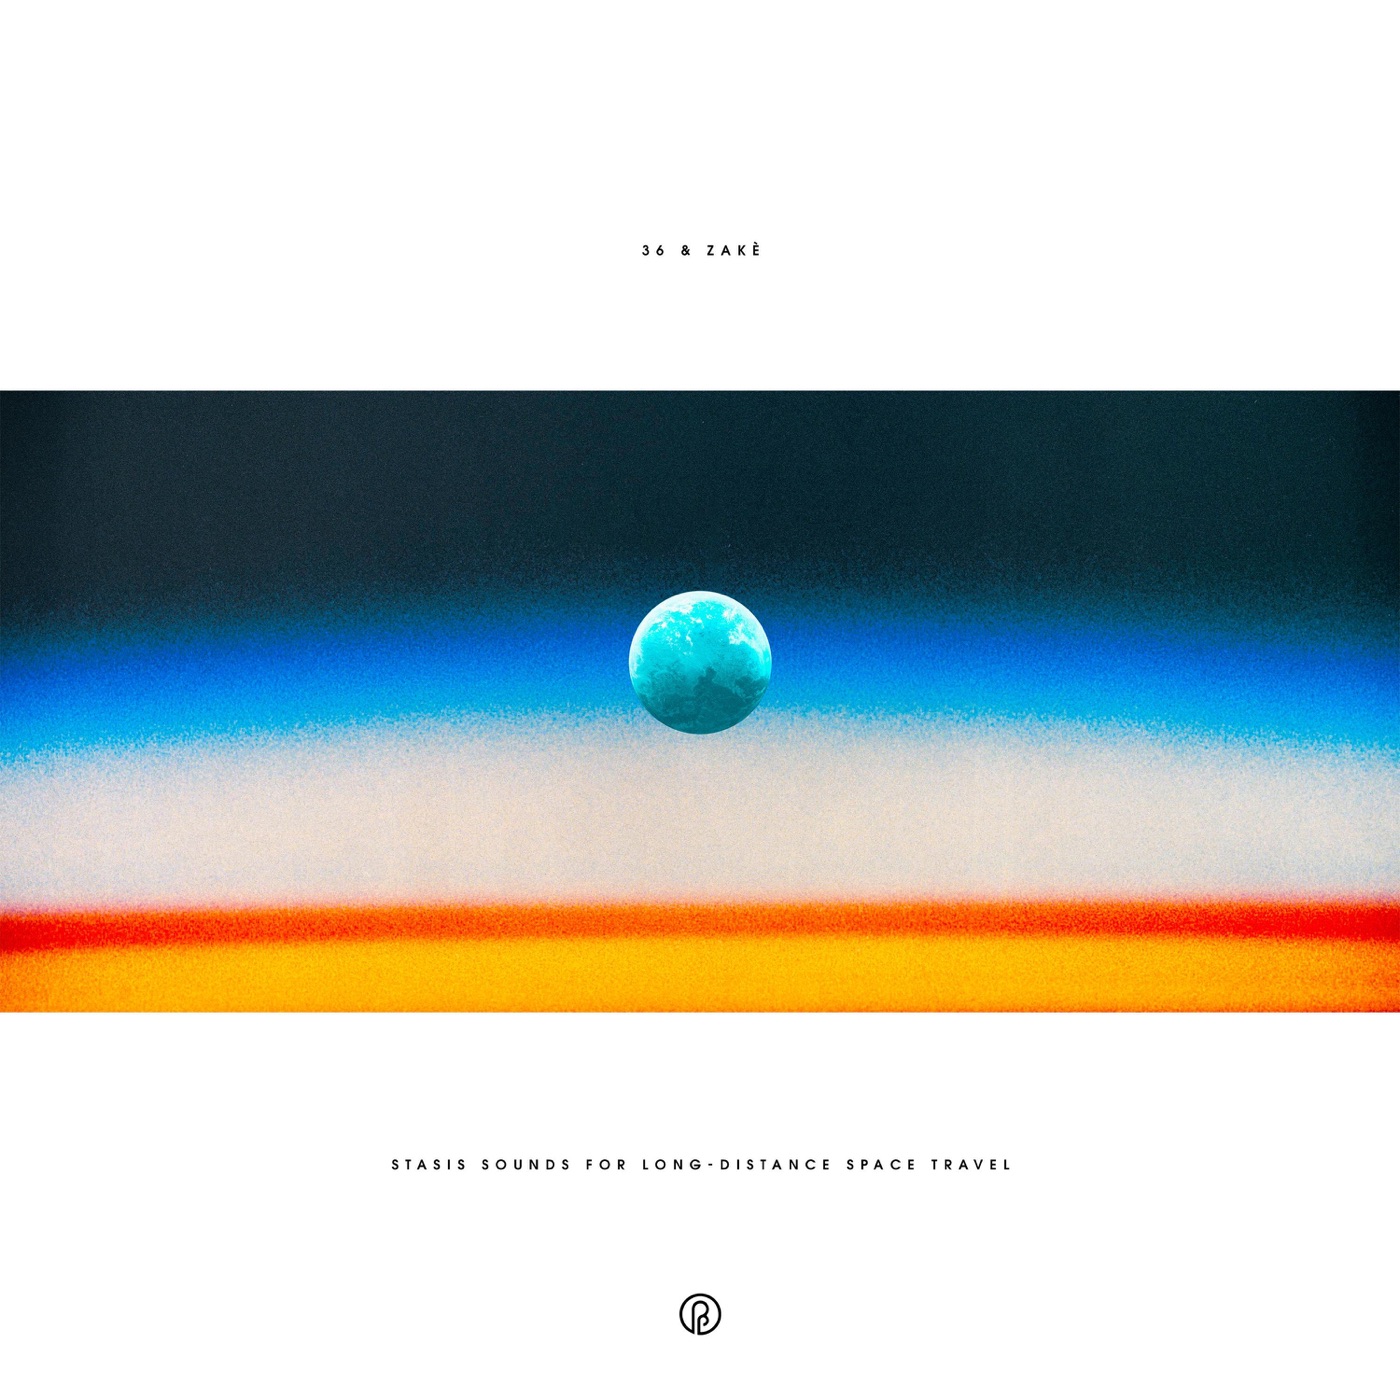 Stasis Sounds for Long-Distance Space Travel by 36, zakè